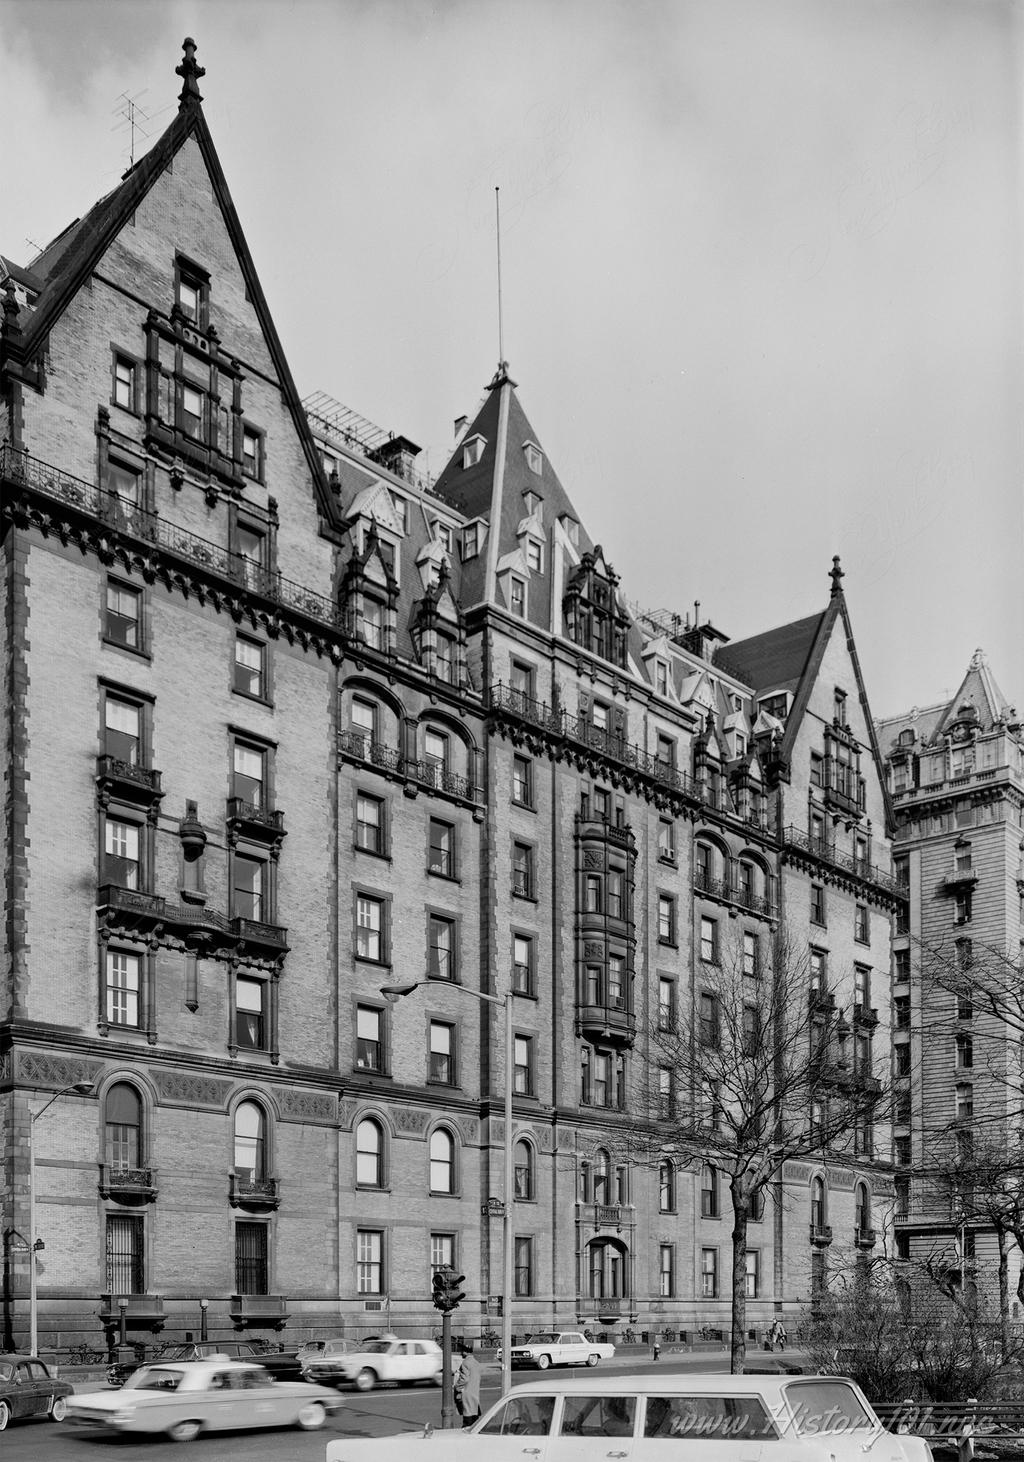 Photograph of The Dakota Apartments, located at 1 West 72nd Street, Central Park West.